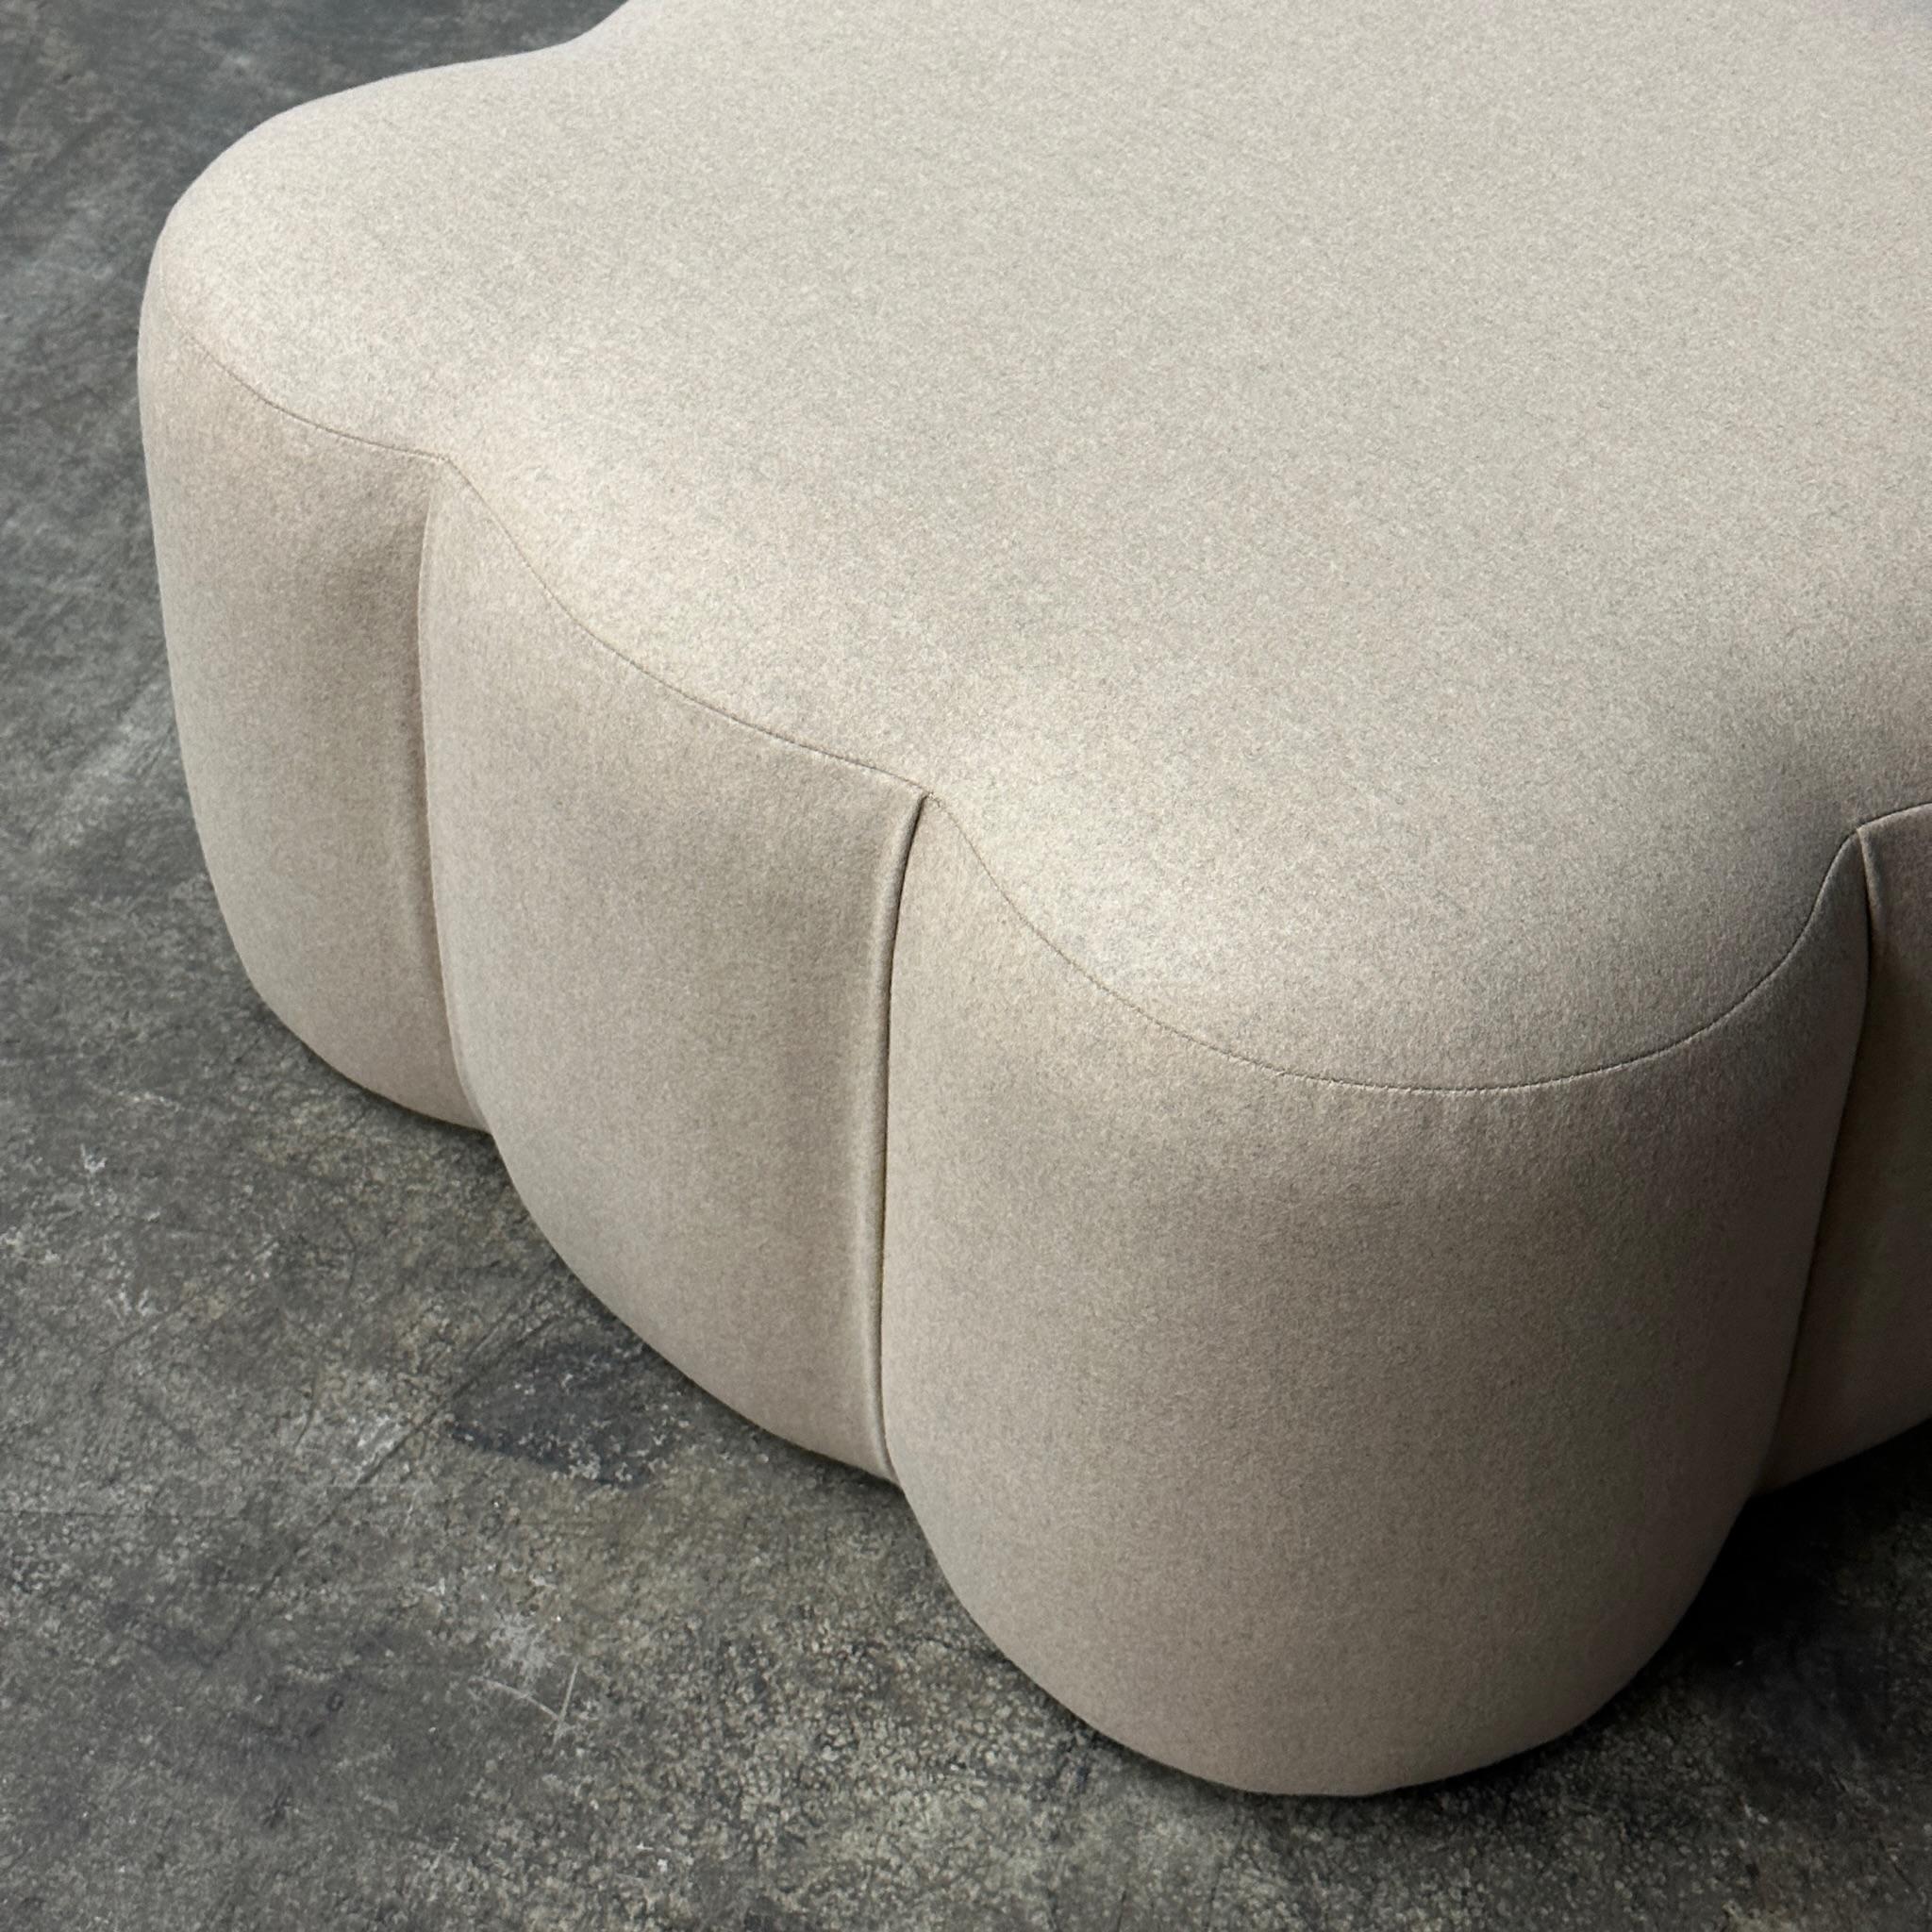 Reupholstered in peachy beige Kvadrat fabric. Perfect as a statement piece or as an accessory to a lounge chair. 